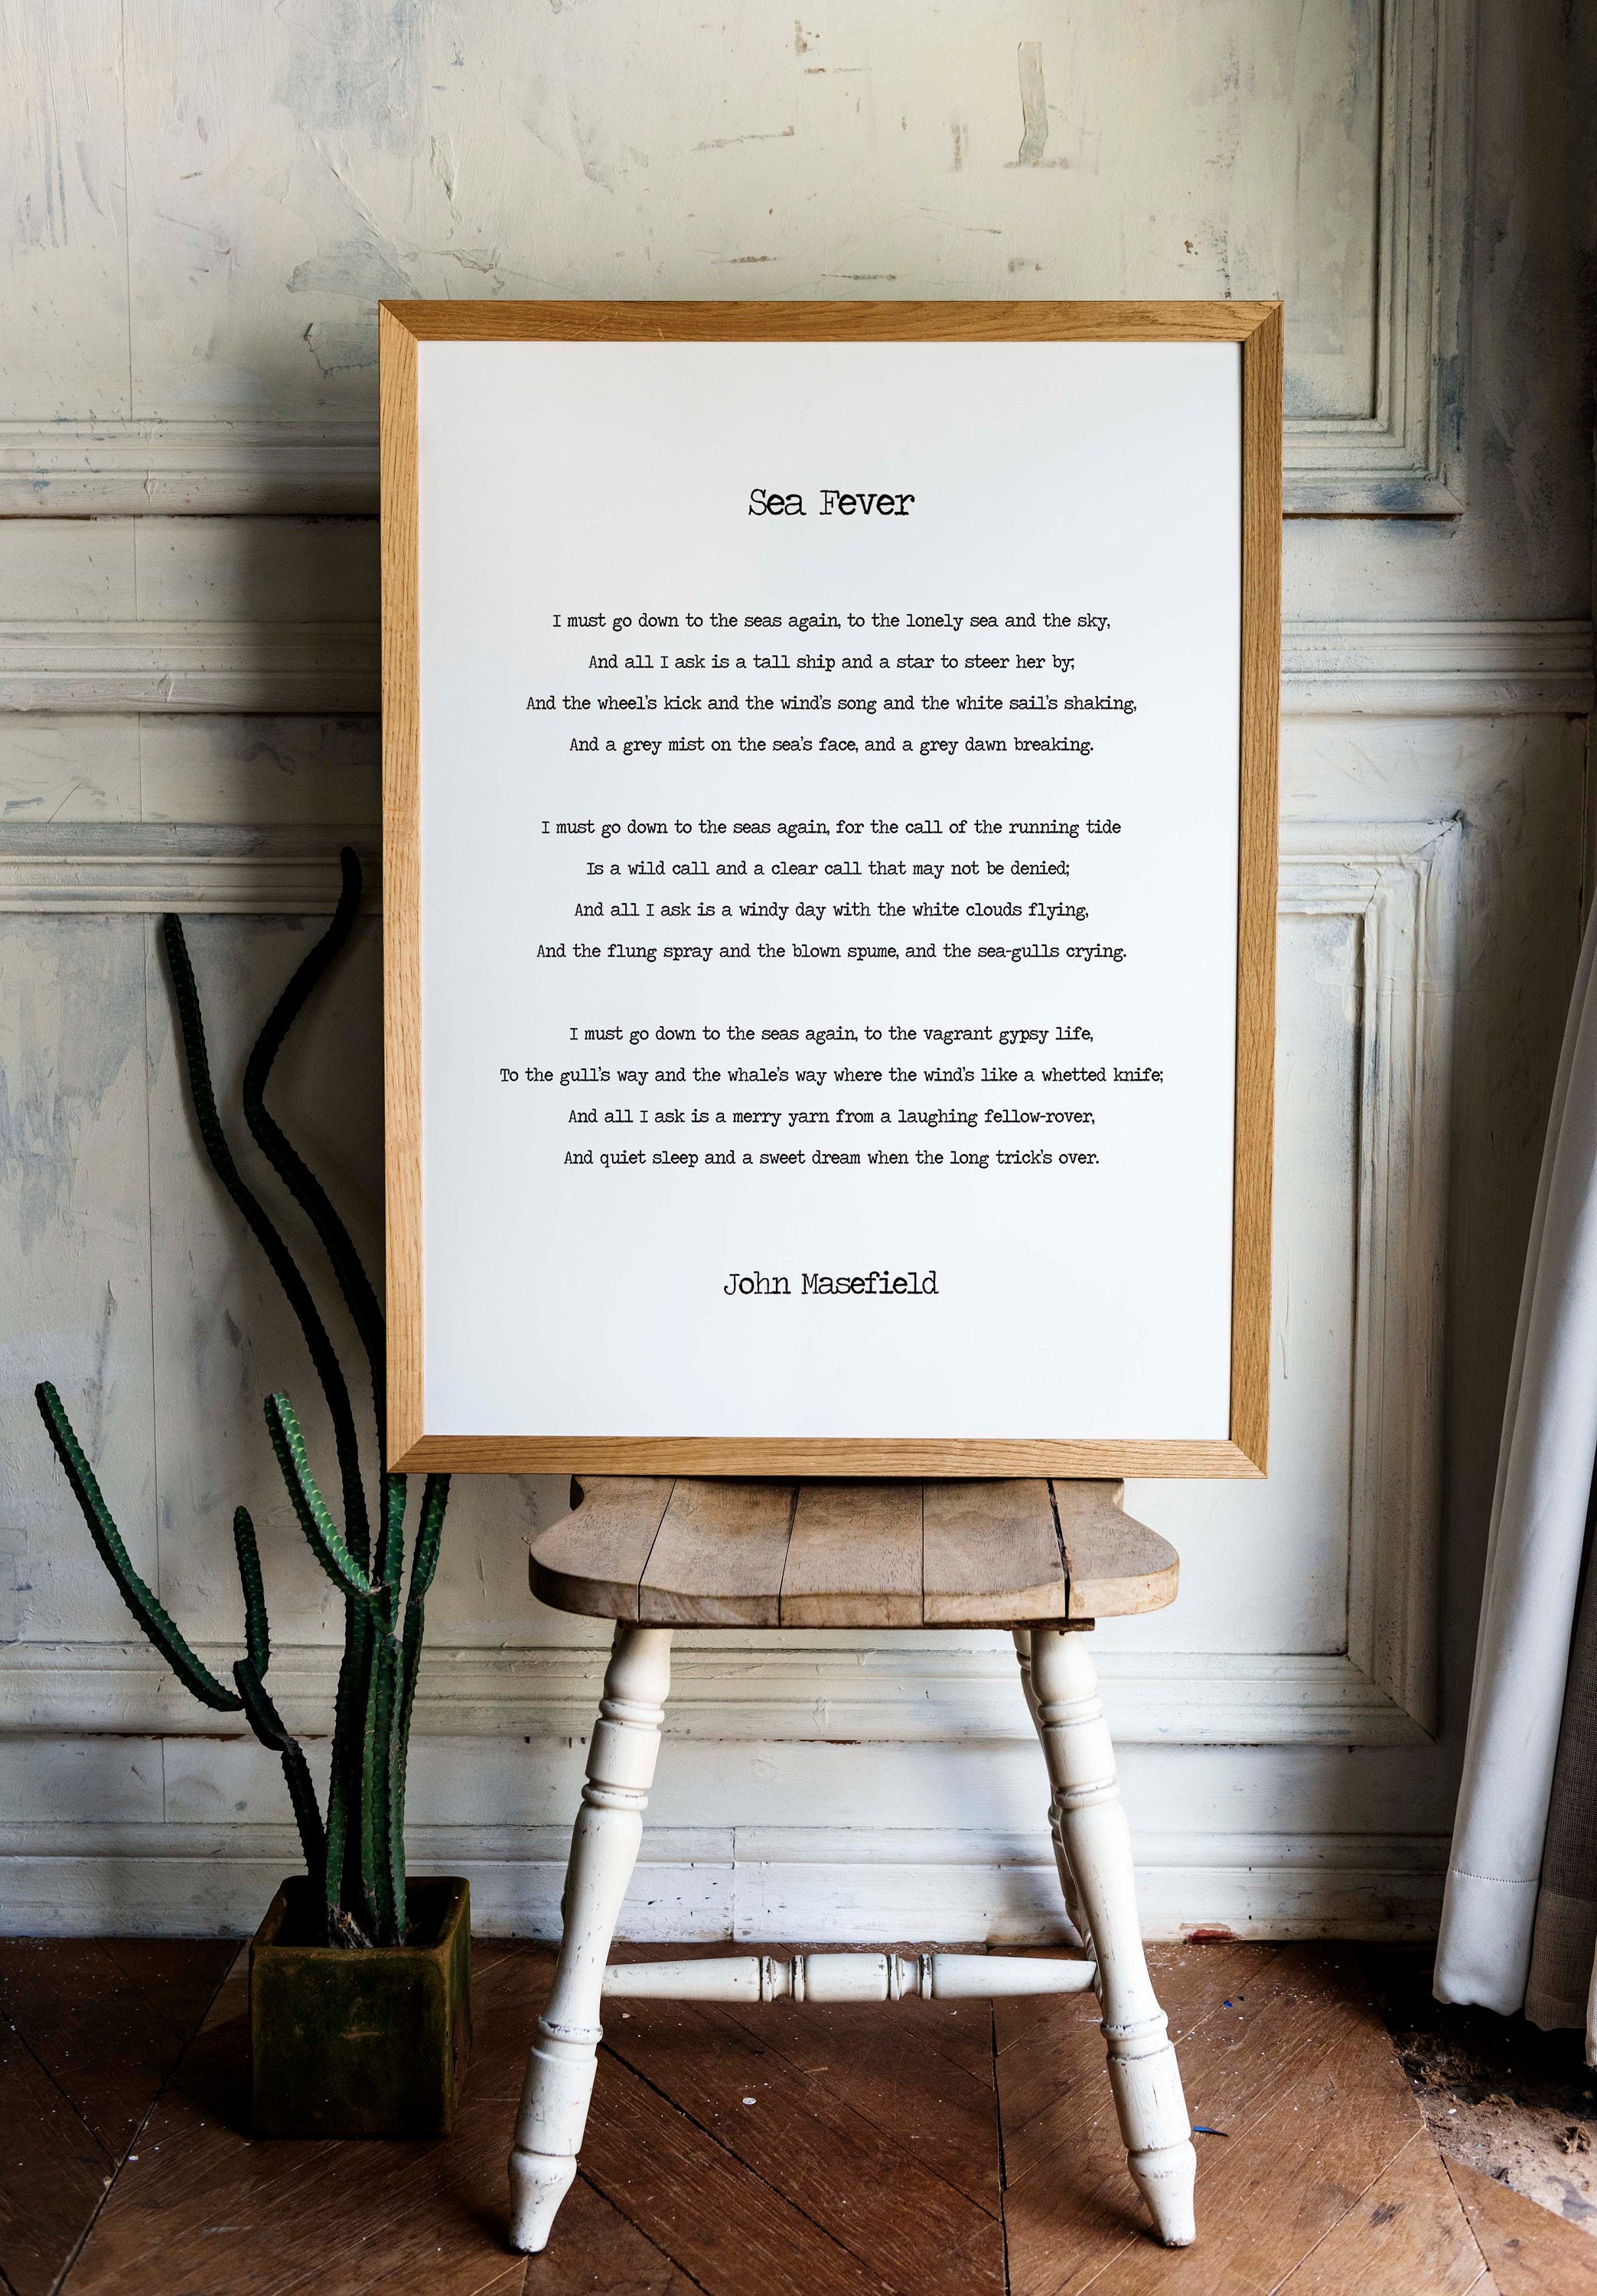 Sea Fever Poem by John Masefield, I Must Go Down To The Seas Again Poetry Art Print, Literary Print Unframed Black & White - BookQuoteDecor